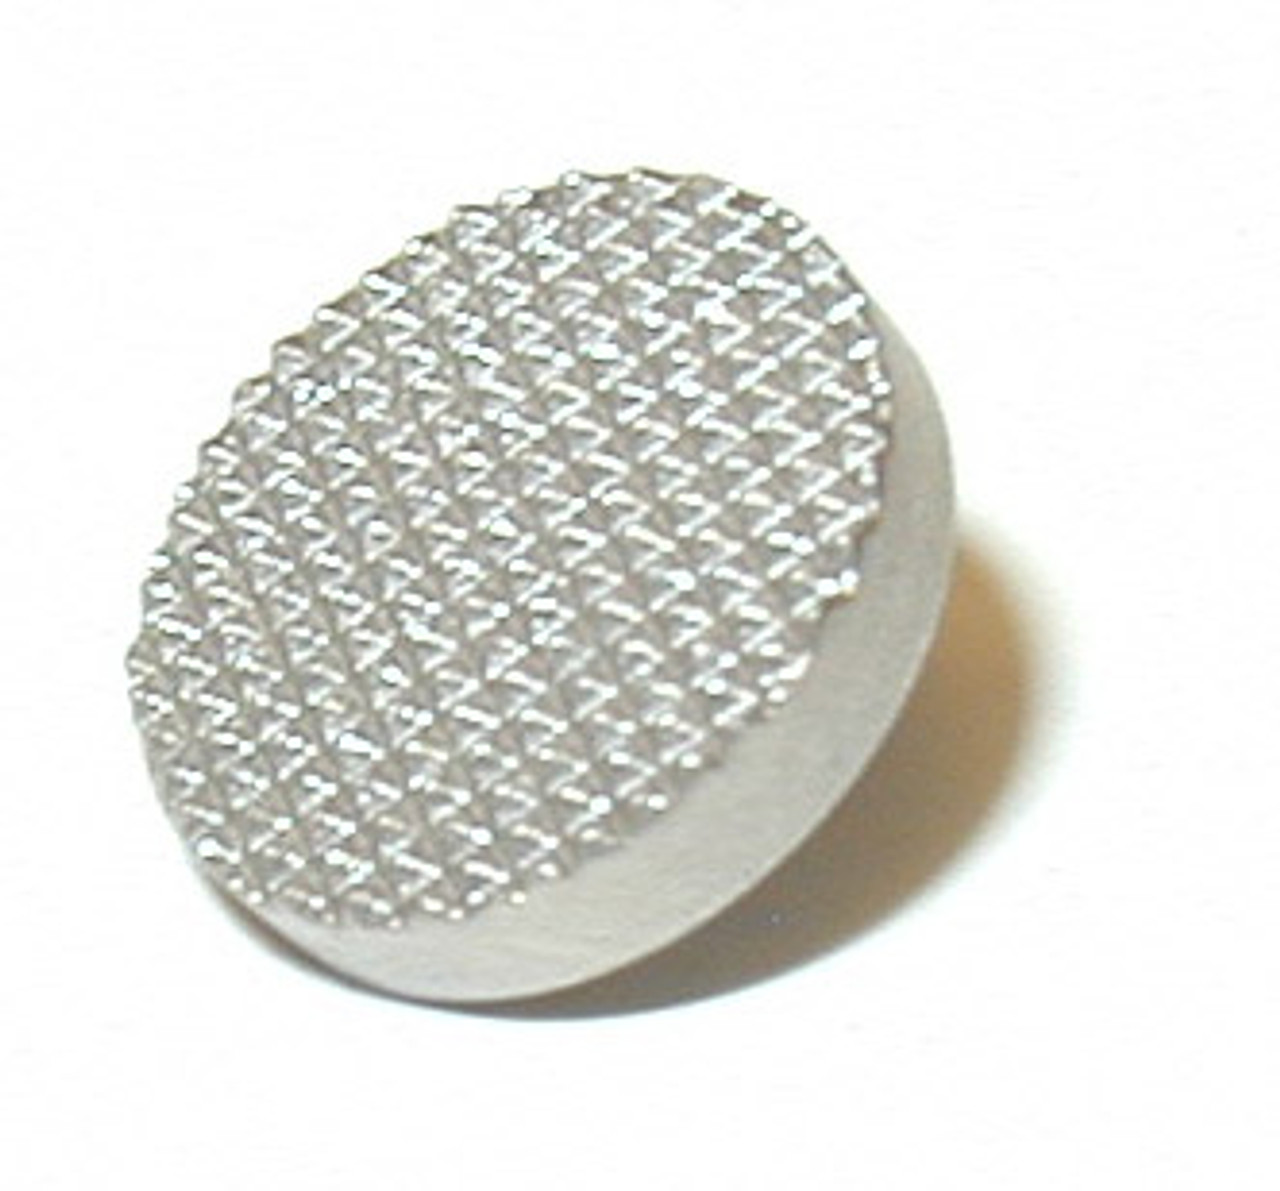 Mag Release Button, for 1911/2011/HiCap, Low Profile, by Dawson